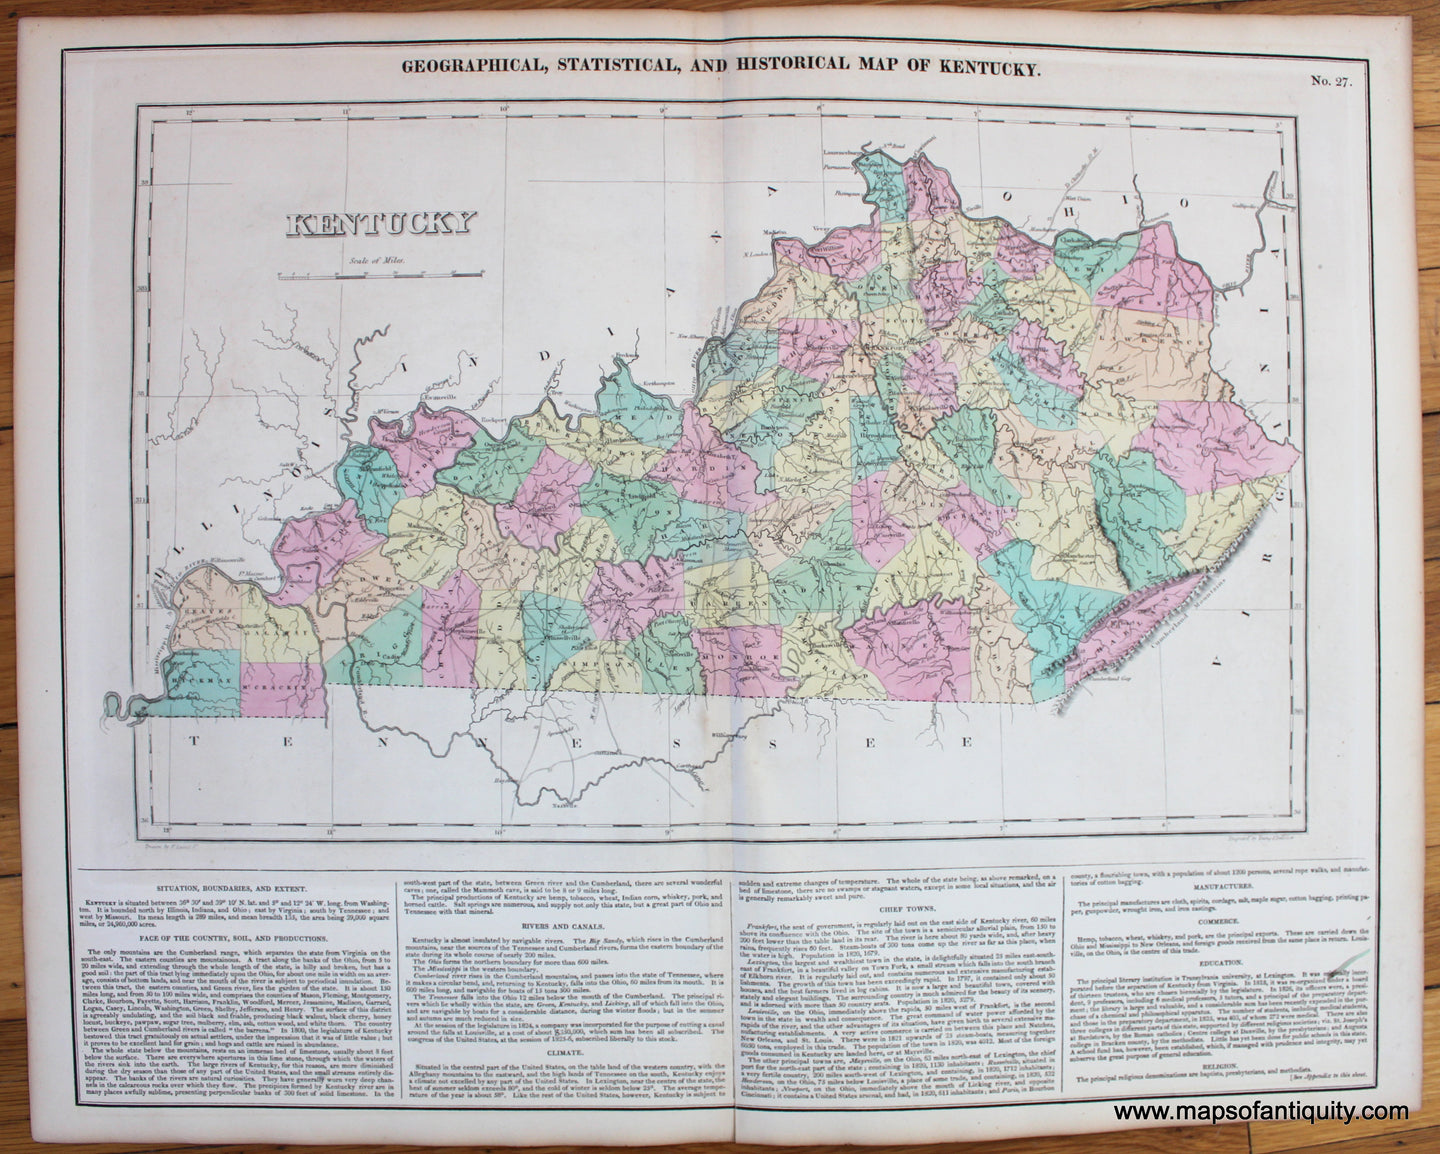 Antique-Map-Geographical-Statistical-and-Historical-Map-of-Kentucky.-No.-27.-Carey-Lea-1827-1820s-1800s-19th-century-Maps-of-Antiquity